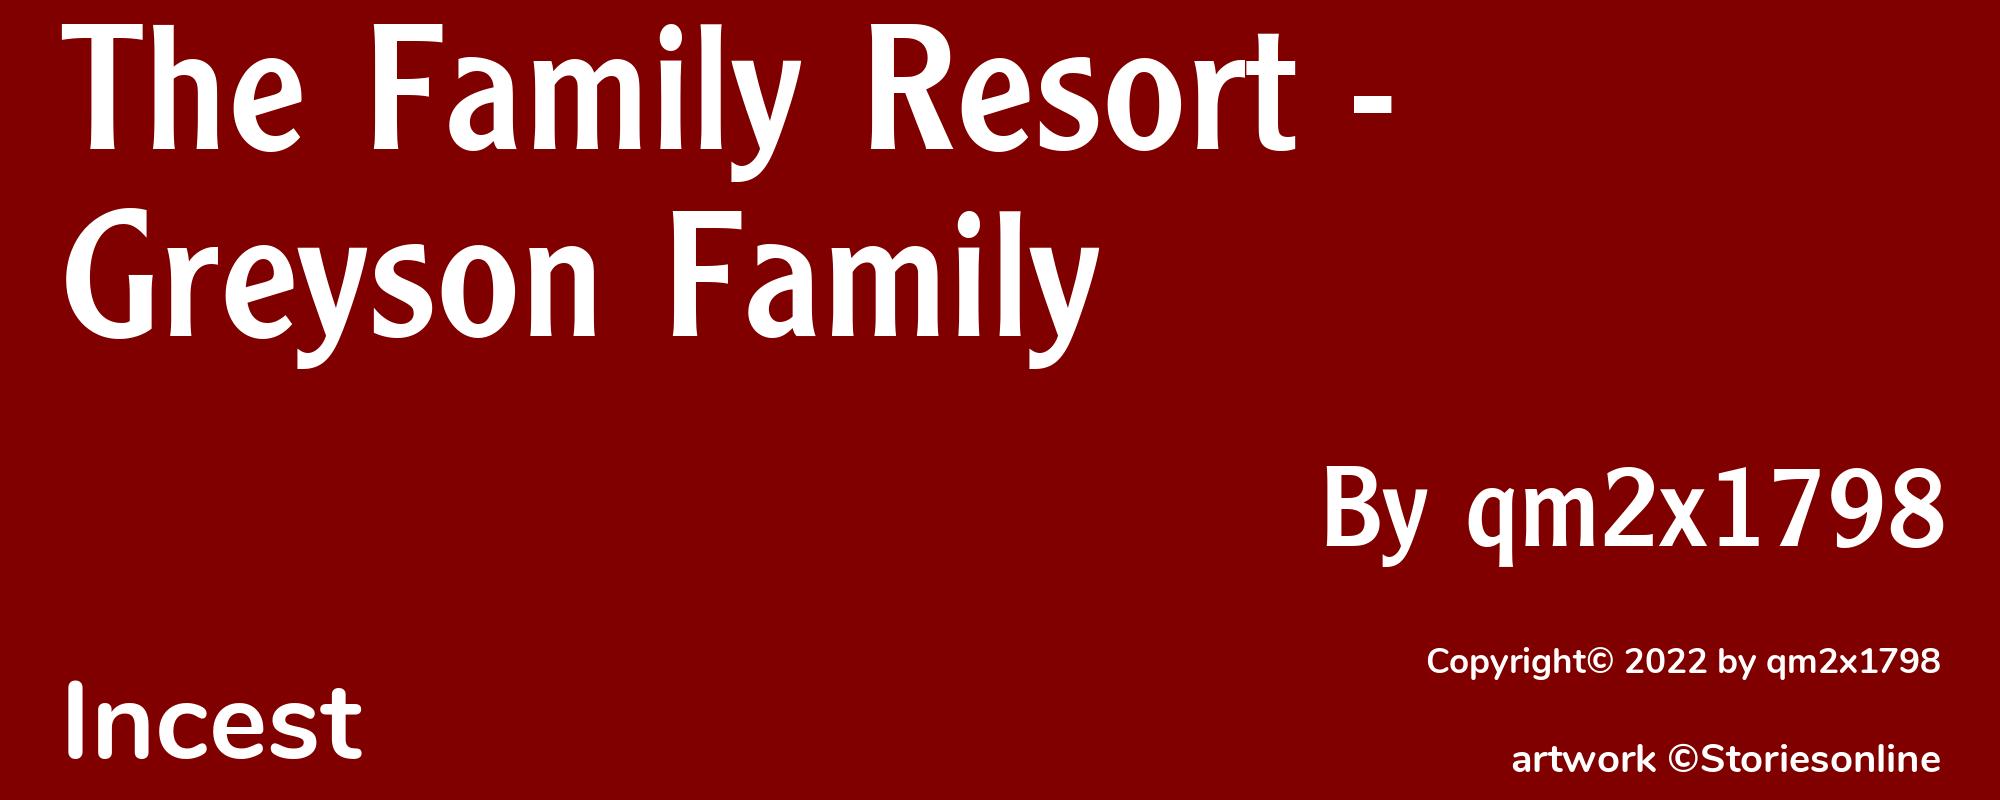 The Family Resort - Greyson Family - Cover